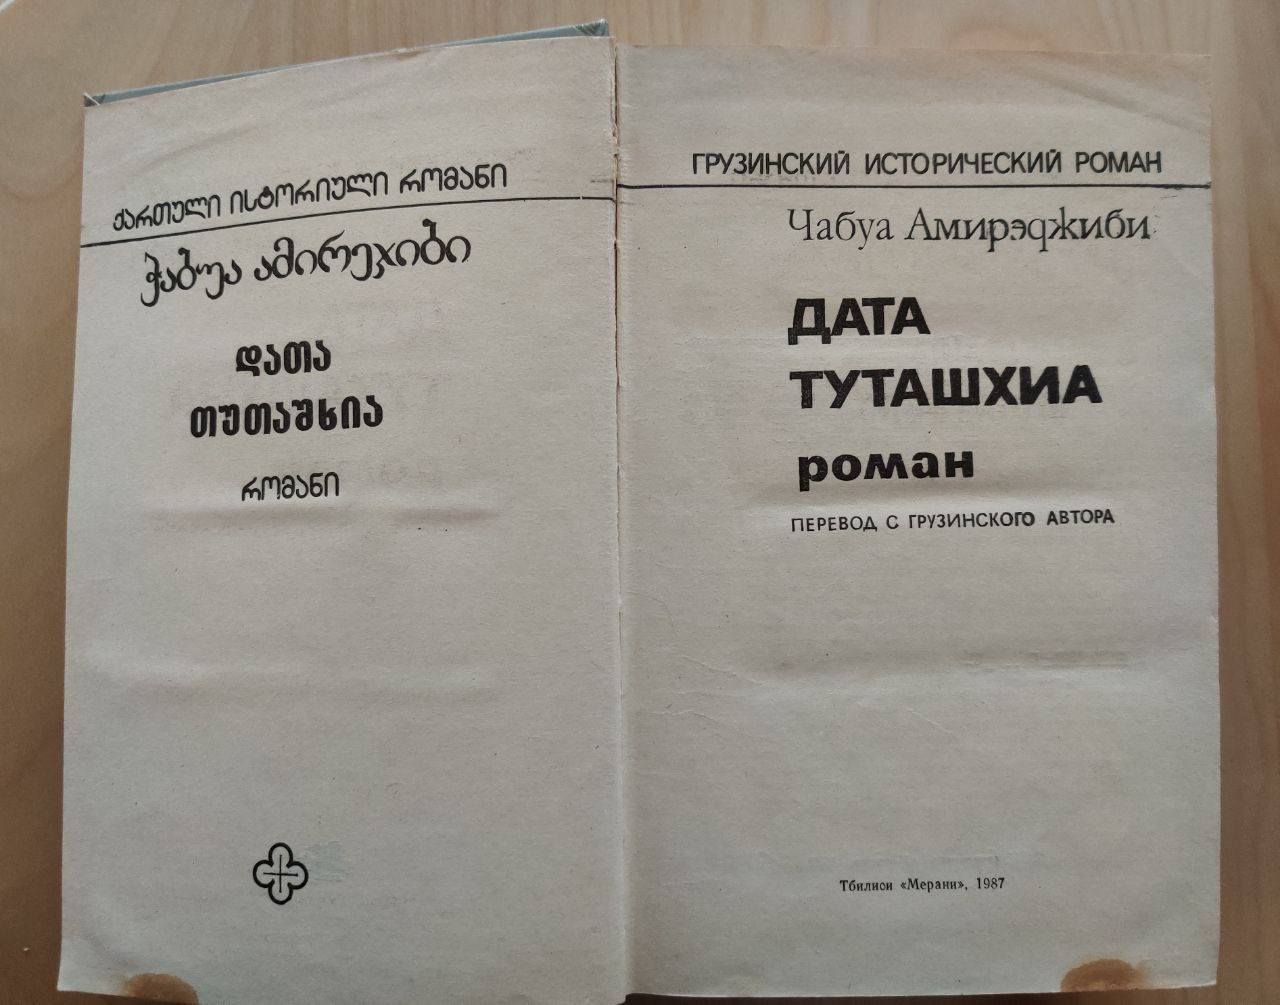 “Дата Туташхиа” title page